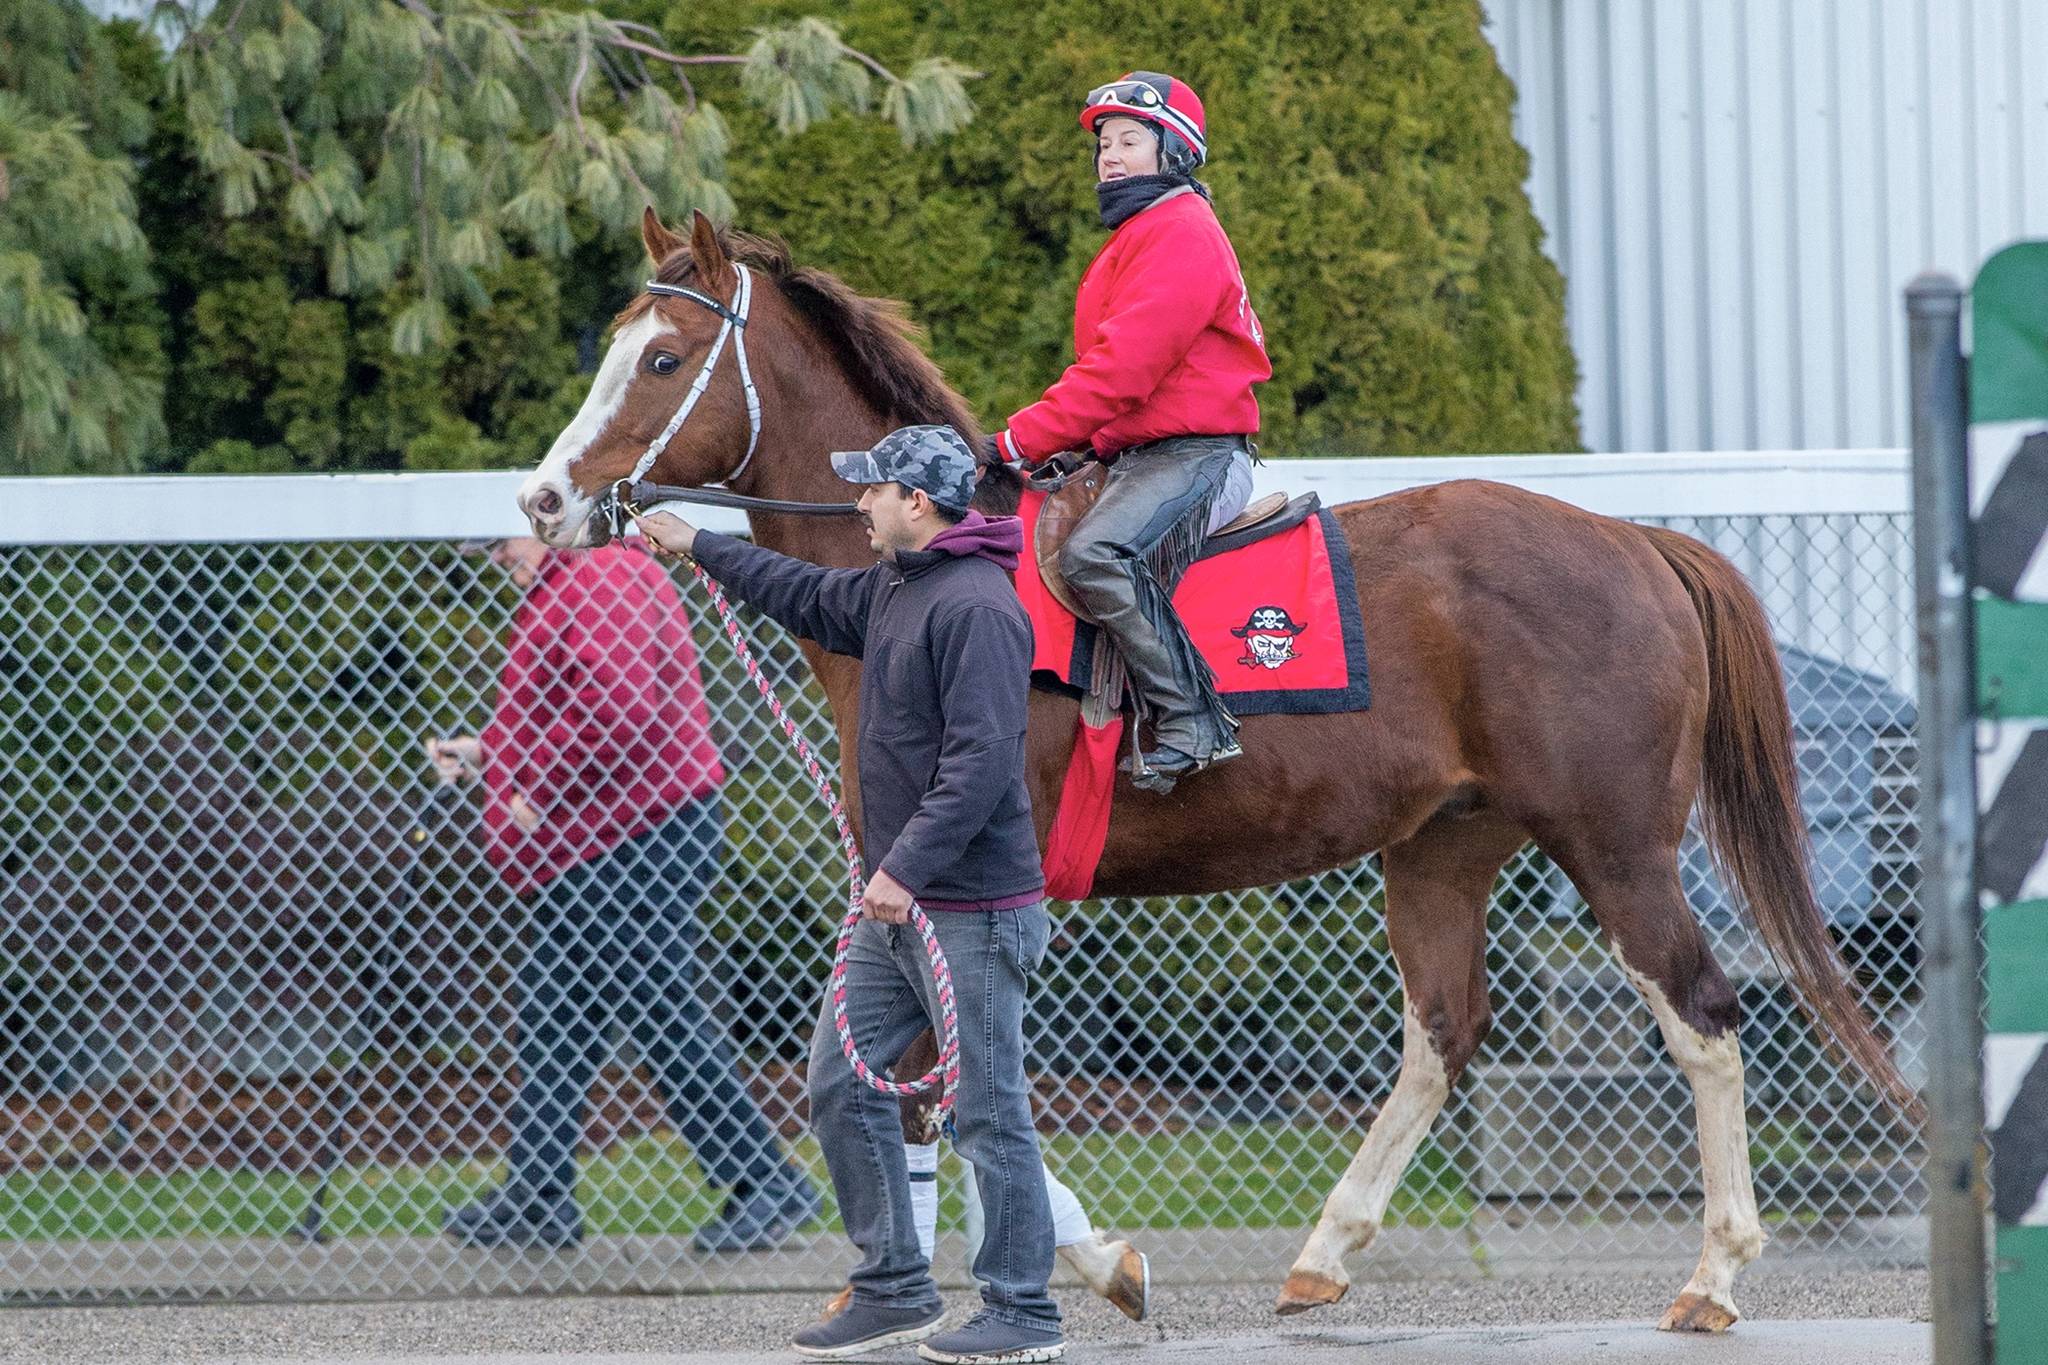 Emerald Downs still plans to have horse racing season in 2020